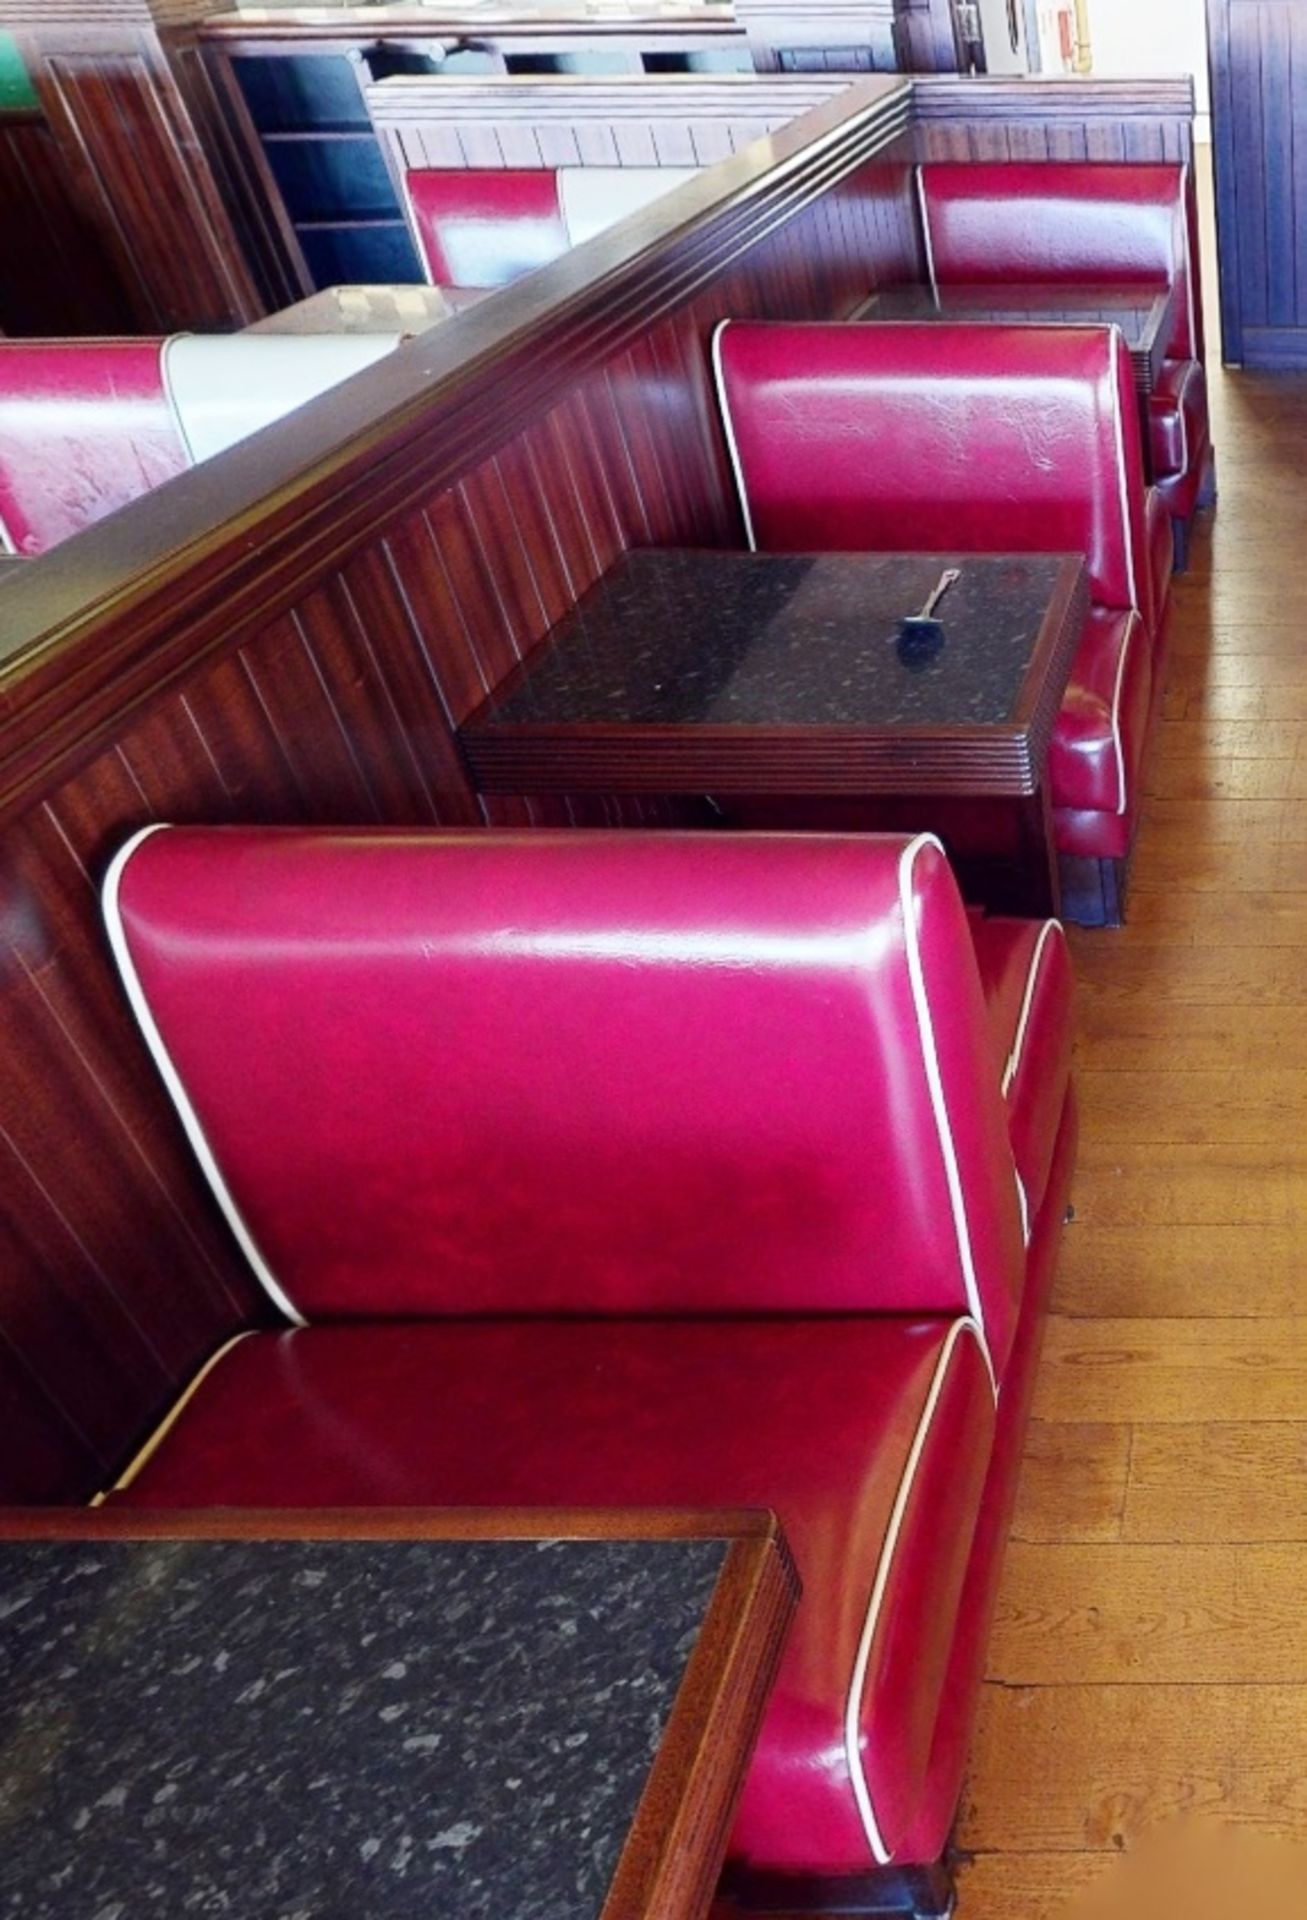 1 x Assorted Lot of Restaurant Seating Benches - Seats 18 Persons - American Diner Style in Red - Image 8 of 11